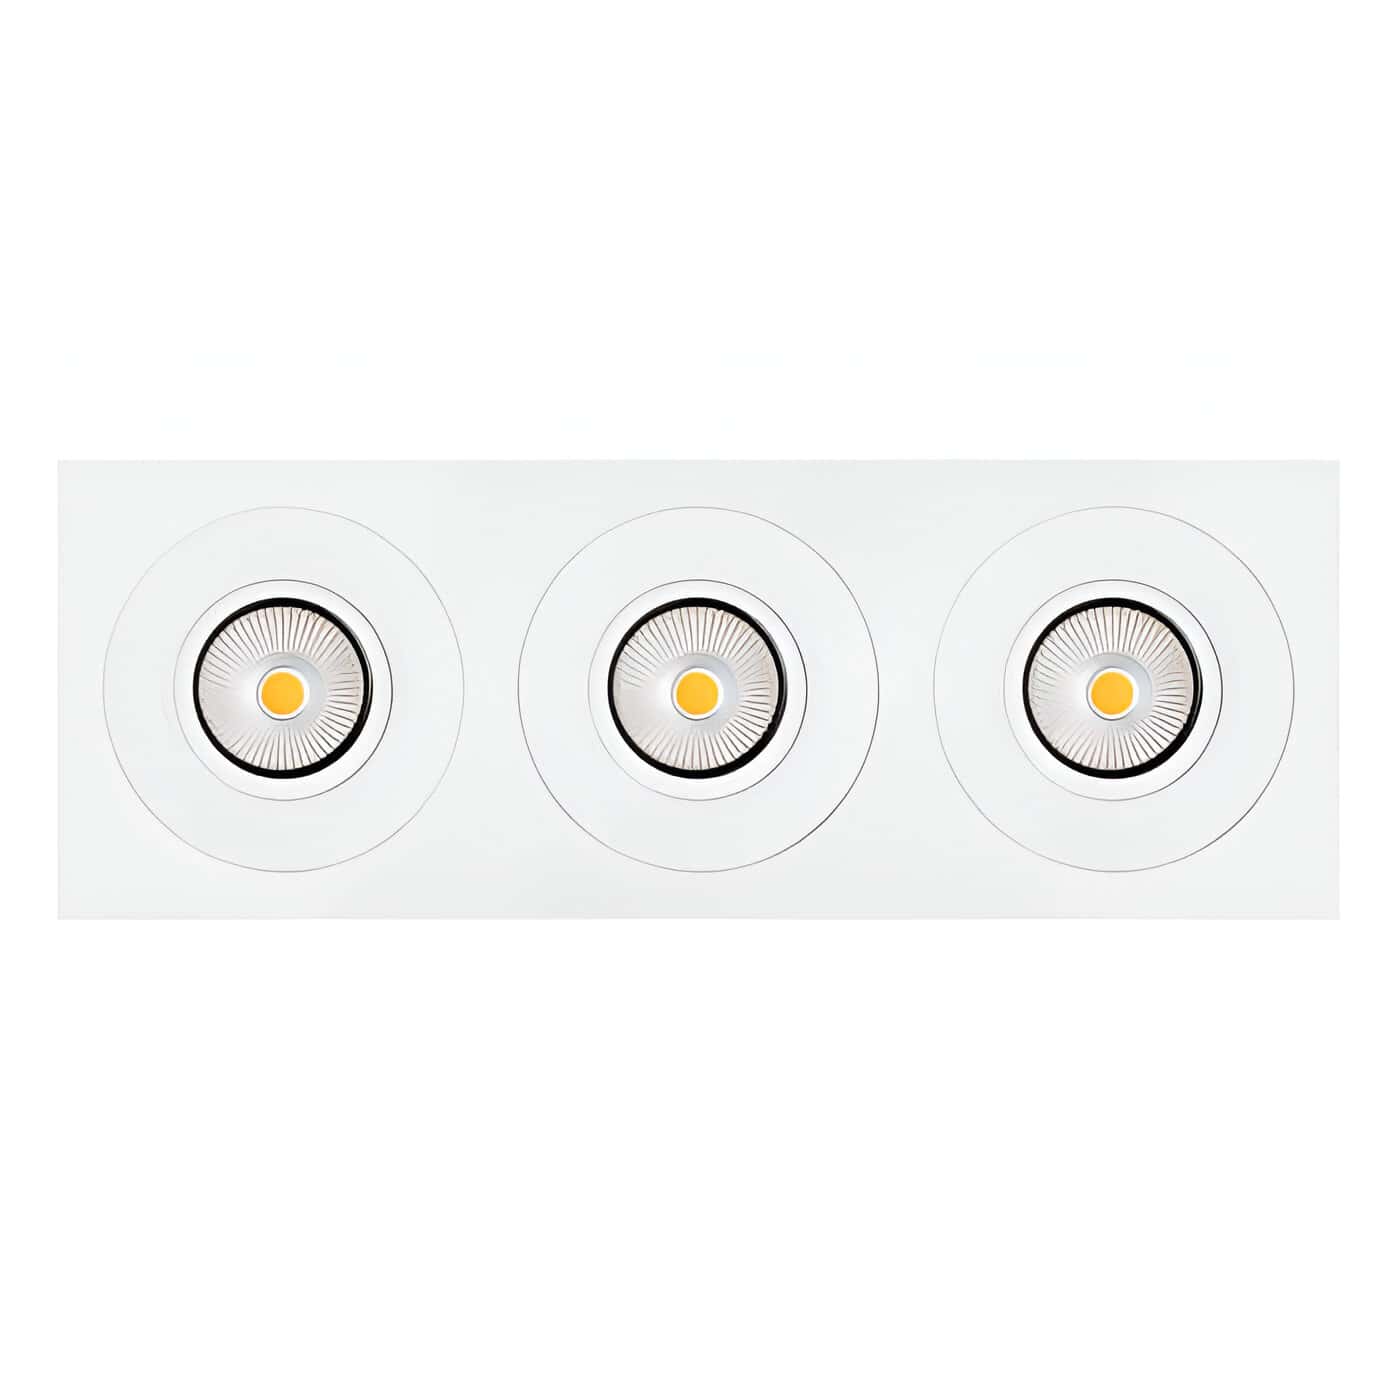 Product image of Zela triple white adapter plate with downlights inside